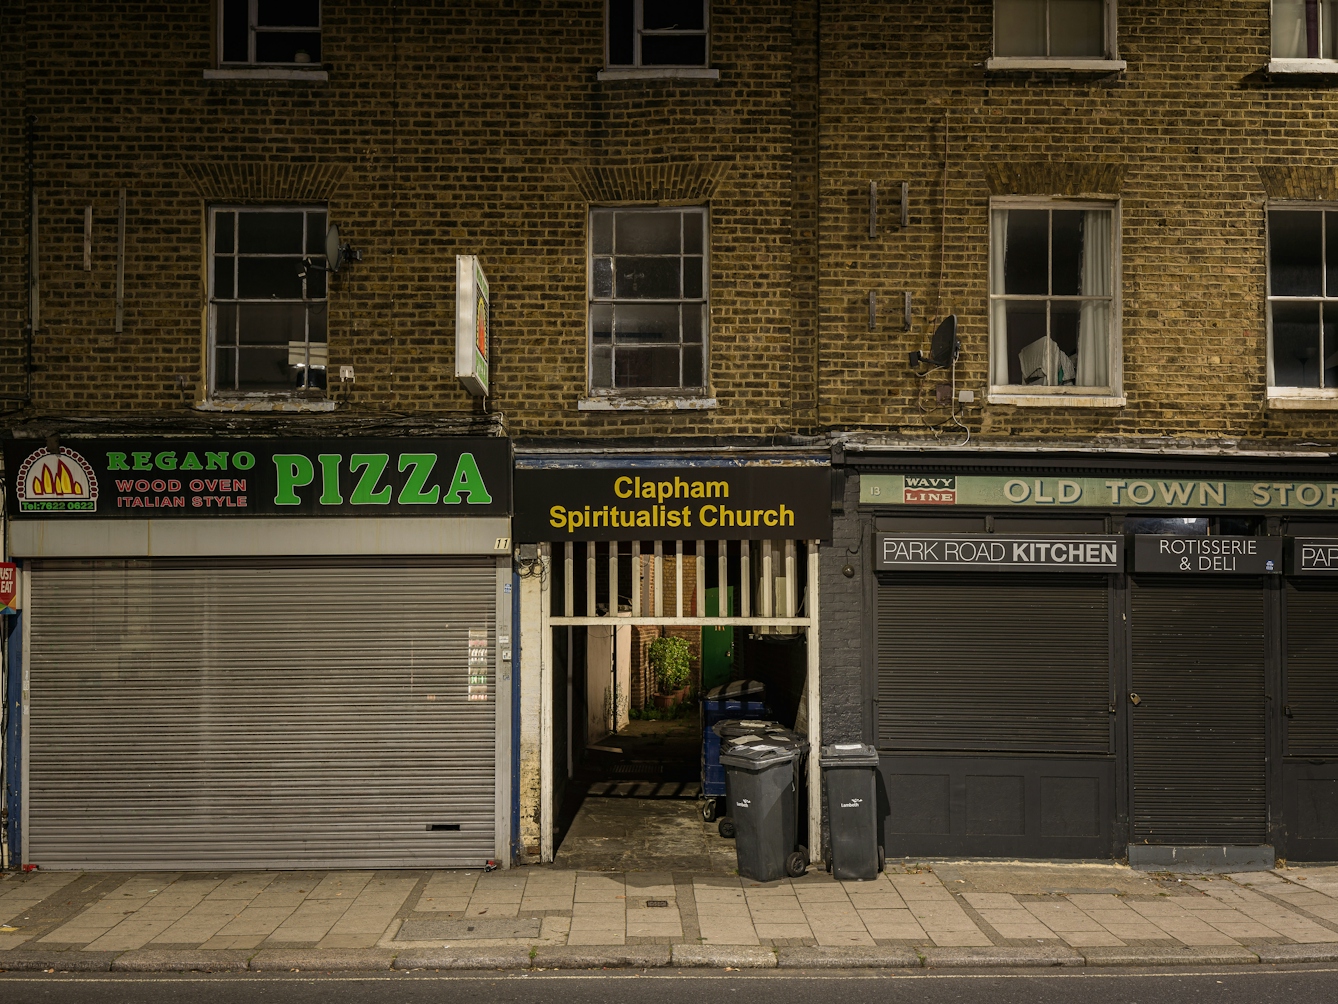 Photograph of the tunnelled entrance to Clapham Spiritualist Church at night.  The church is concealed behind a terraced building, the ground floor of which are commercial properties.  The tunnel has a sign above it that reads 'Clapham Spiritualist Church' in yellow lettering on a black background.  To the left of the entrance is a Pizza takeaway shop, and to the right is the 'Old Town Store' Rotisserie & Deli Shop.